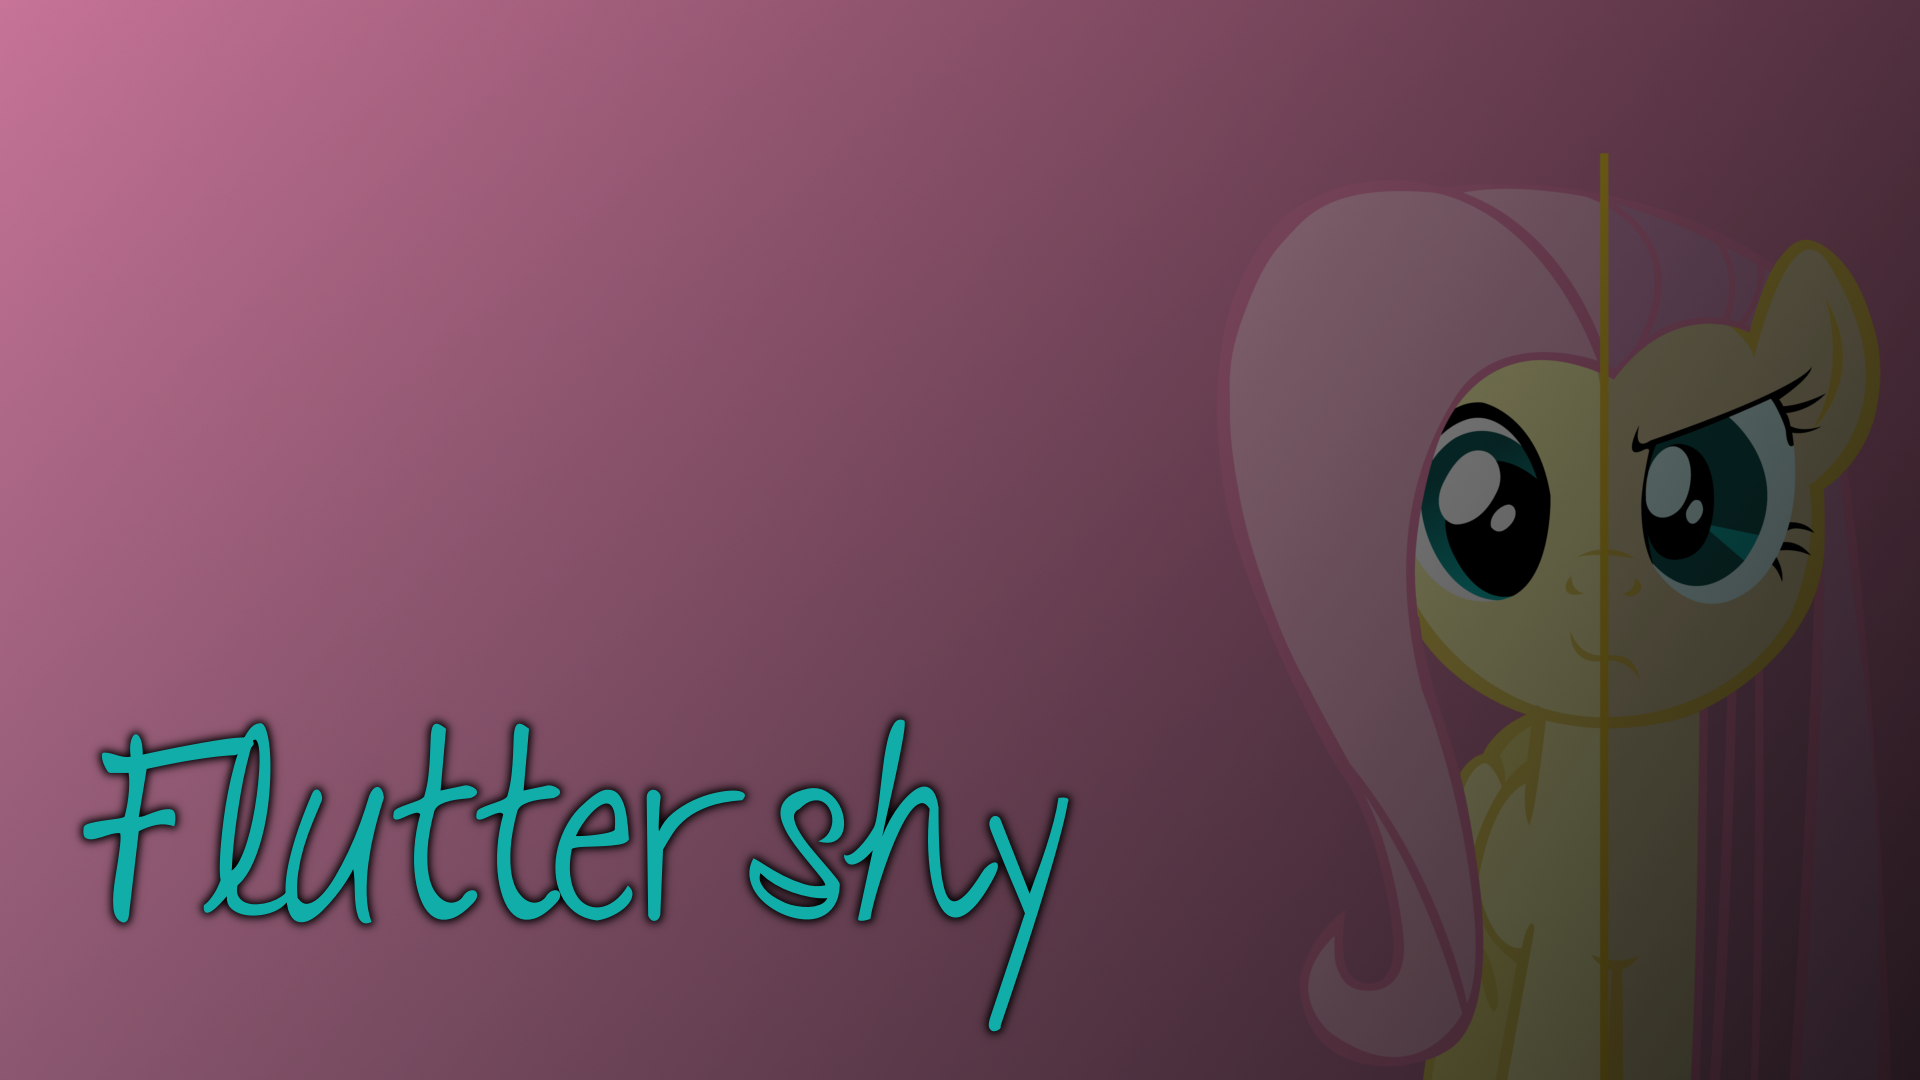 Fluttershy Wallpaper by blingingjak and NightmareAsia